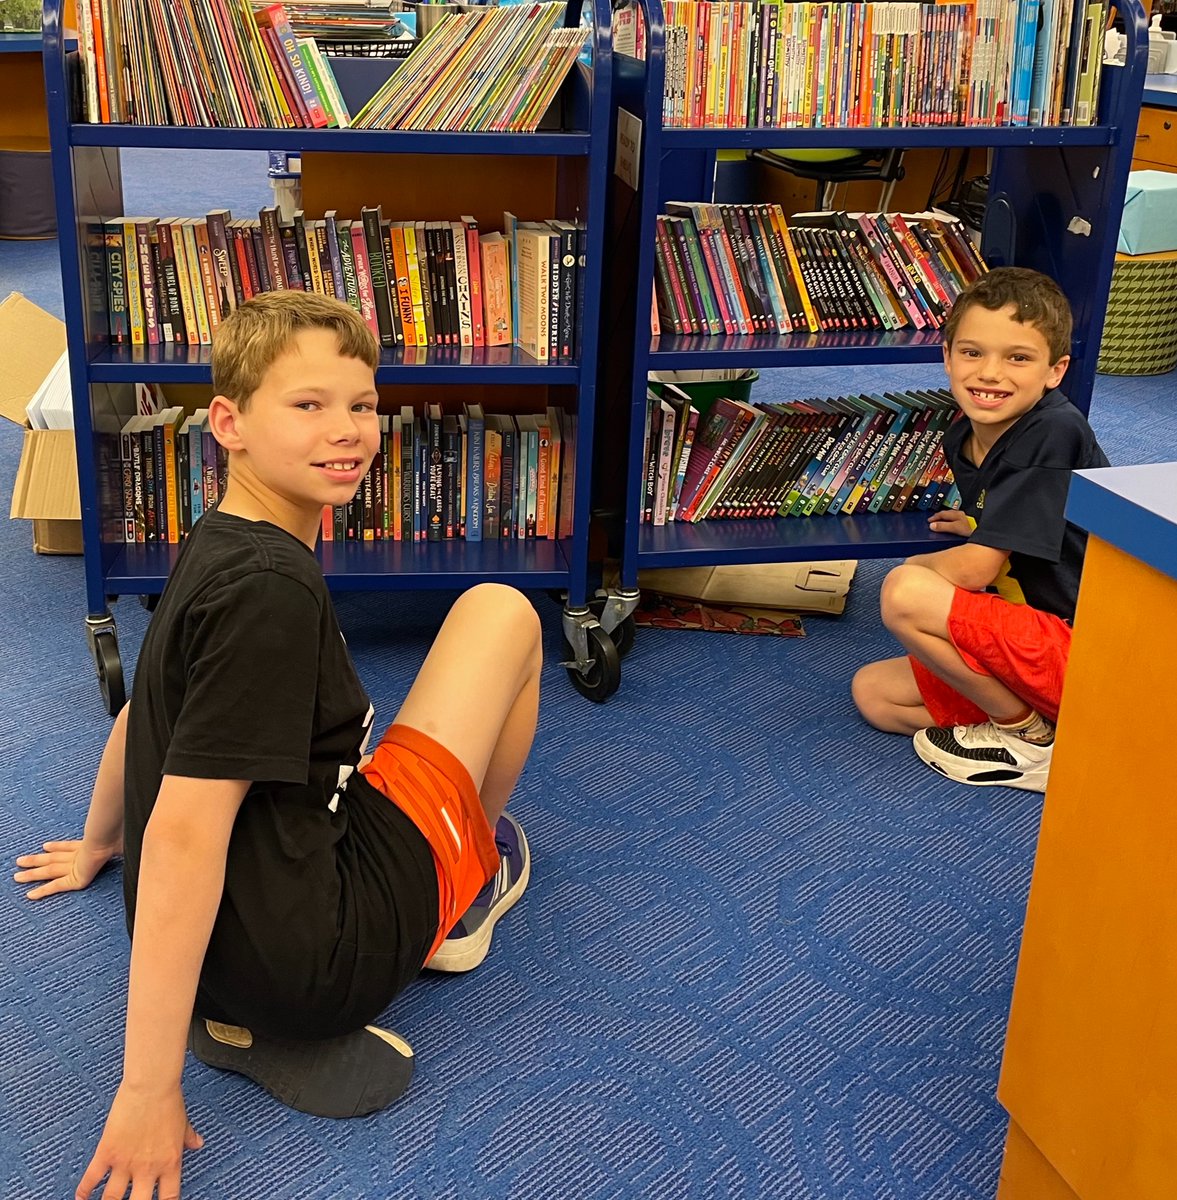 Charlie and William got to pick out FREE BOOKS just for signing up for our Children's Summer Reading Challenge! 📖📚   Use the Beanstack app or visit our Summer Reading page in your browser to get your kids started today! ☀️ #BTPLSummer #LibraryFun btpl.org/summer?utm_con…